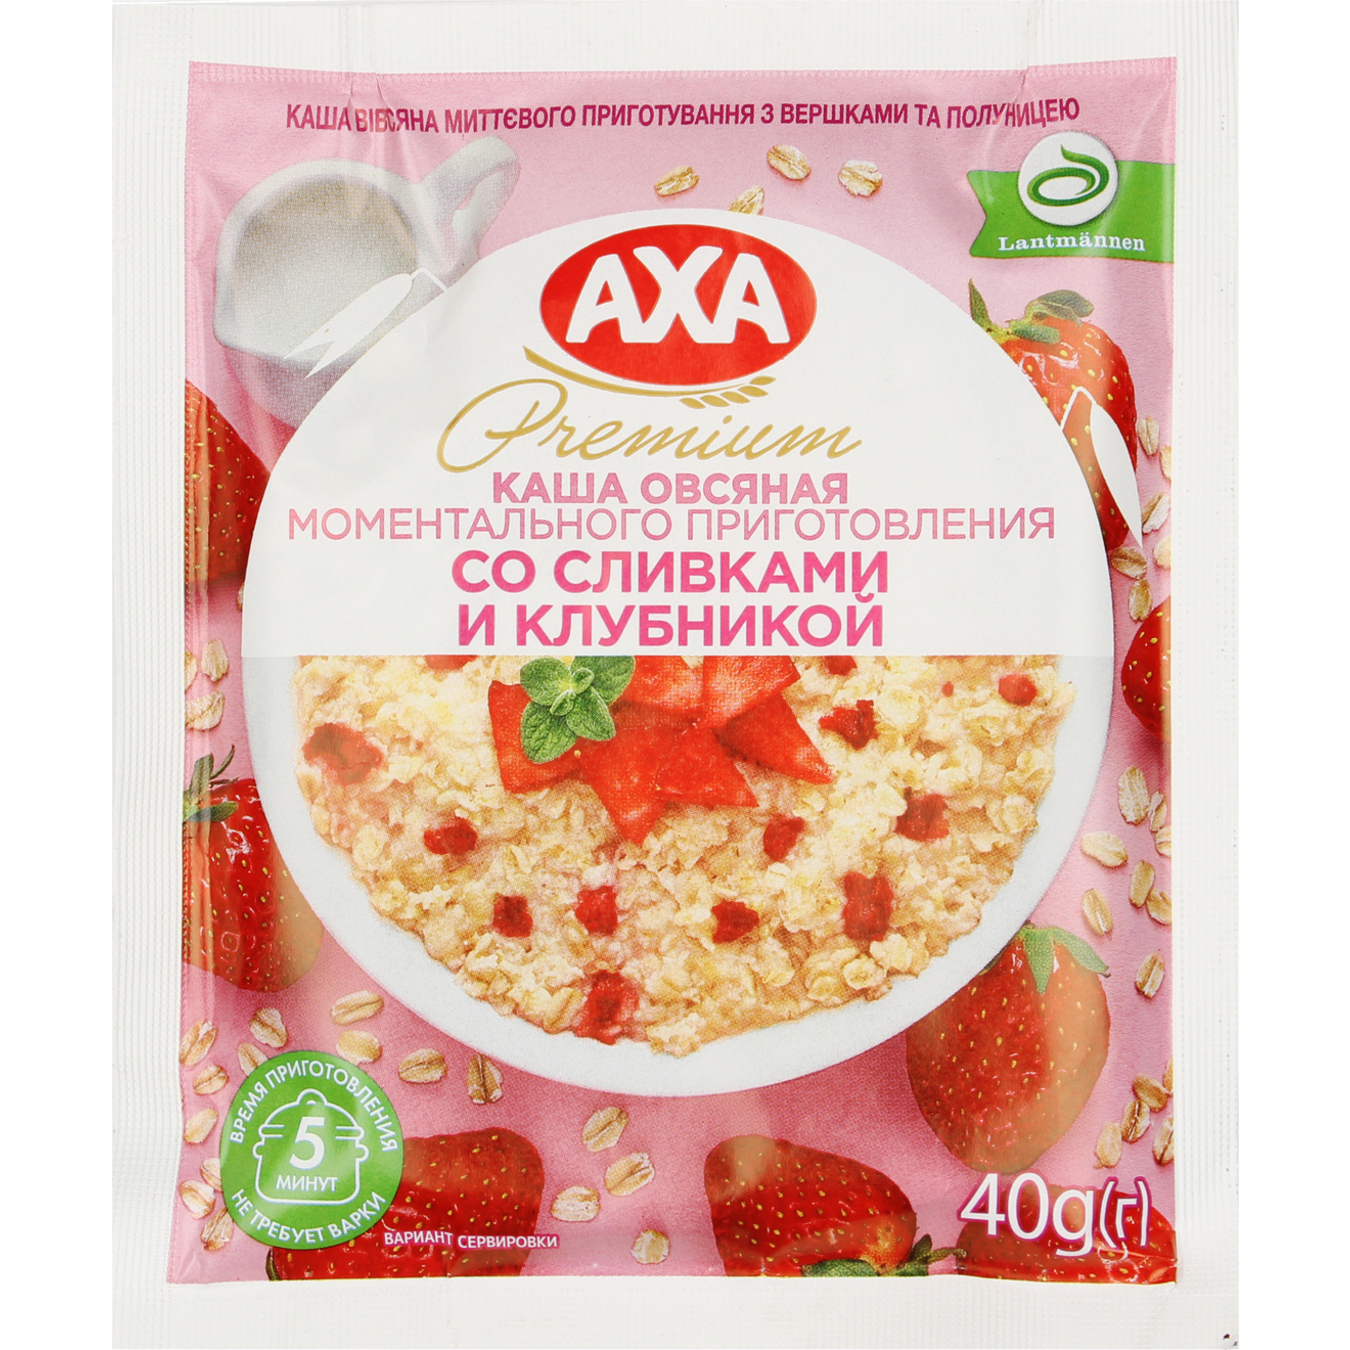 AXA with Cream And Strawberries Quick-Cooking Oatmeal Porridge 40g